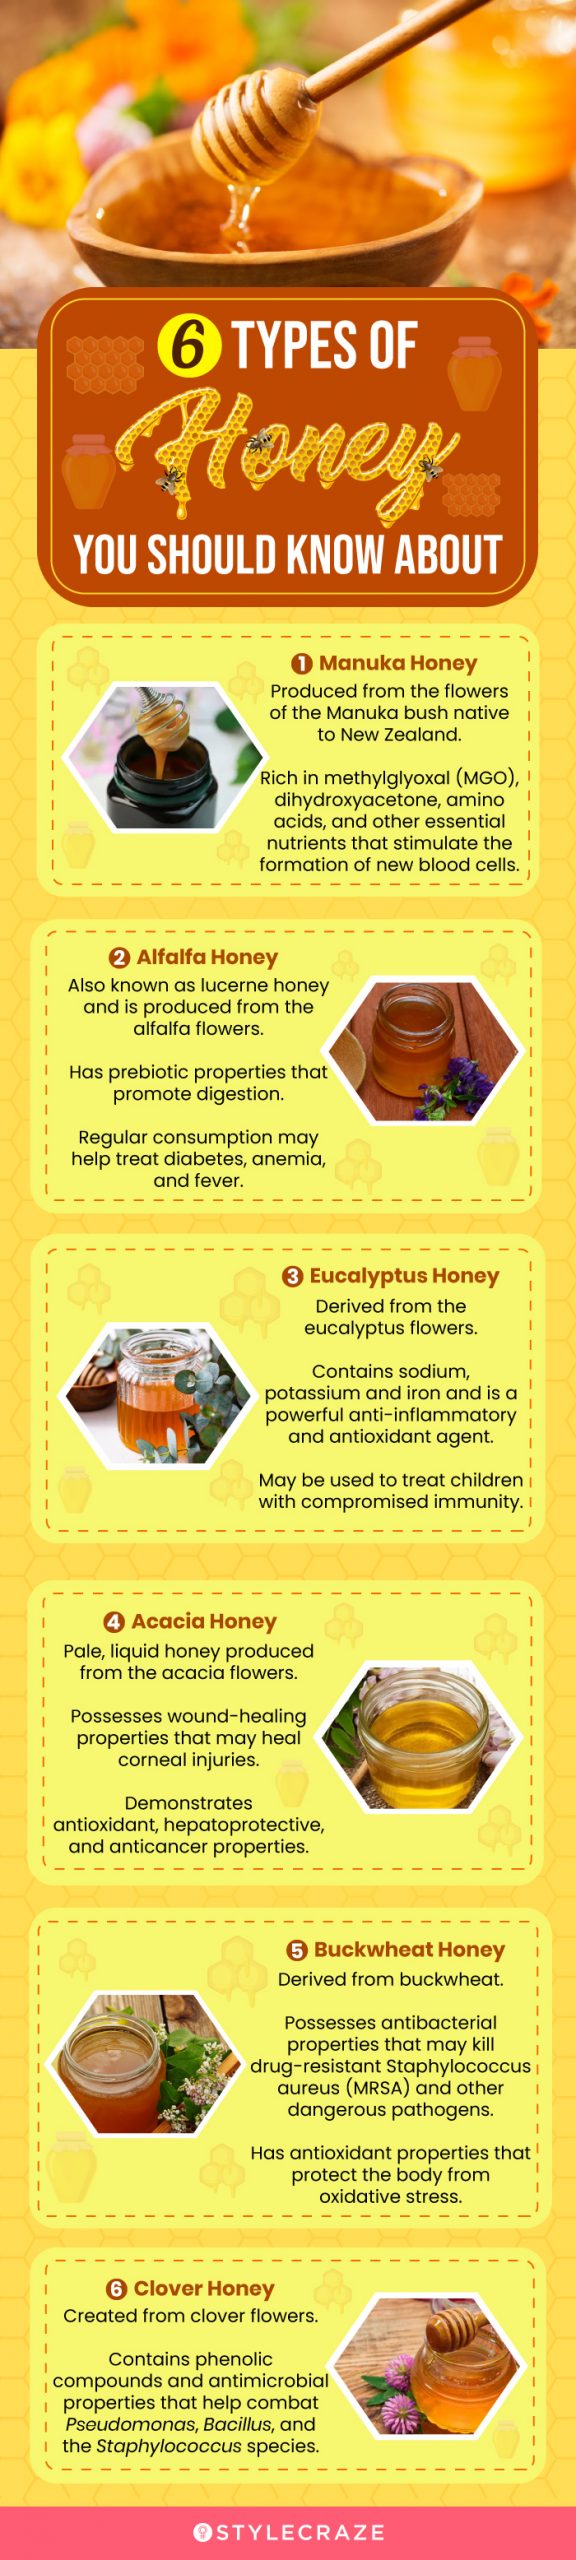 6 types of honey you should know about (infographic)